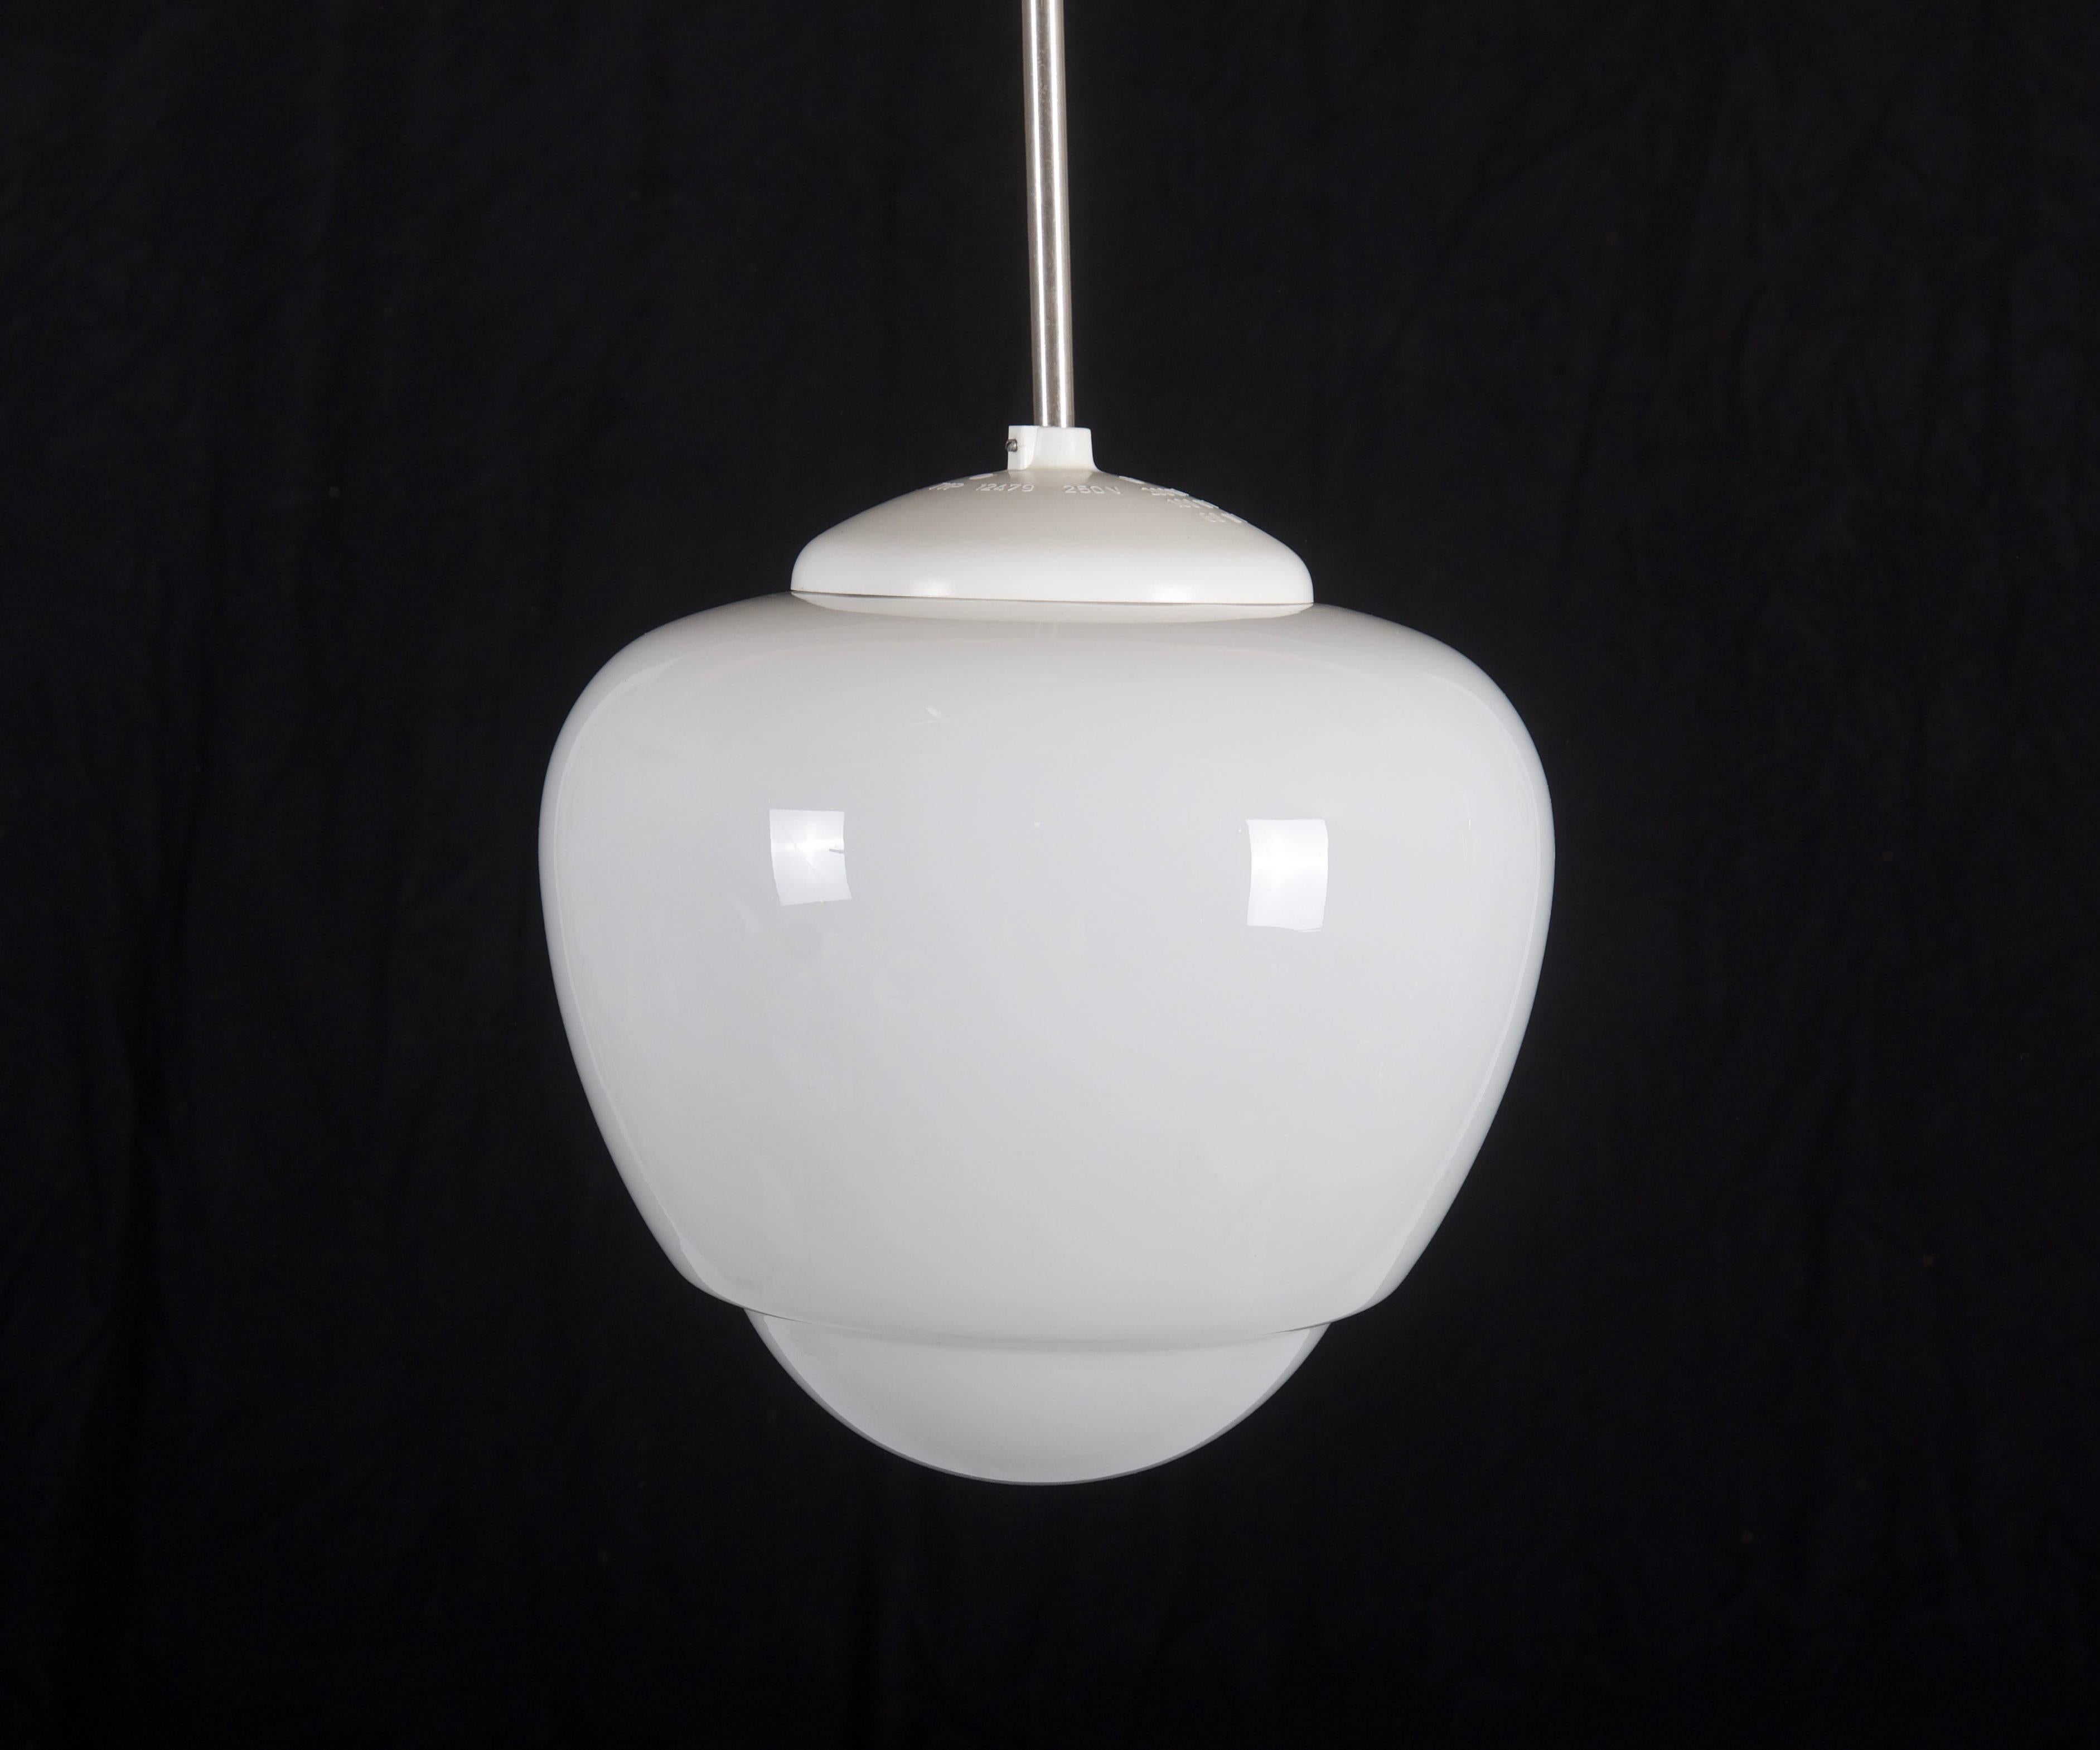 Bauhaus pendant from the 1940s.
Opaline glass shade mounted on a steel construction, cover and shade made of bakelite.
Up to five pieces available. (more on request).